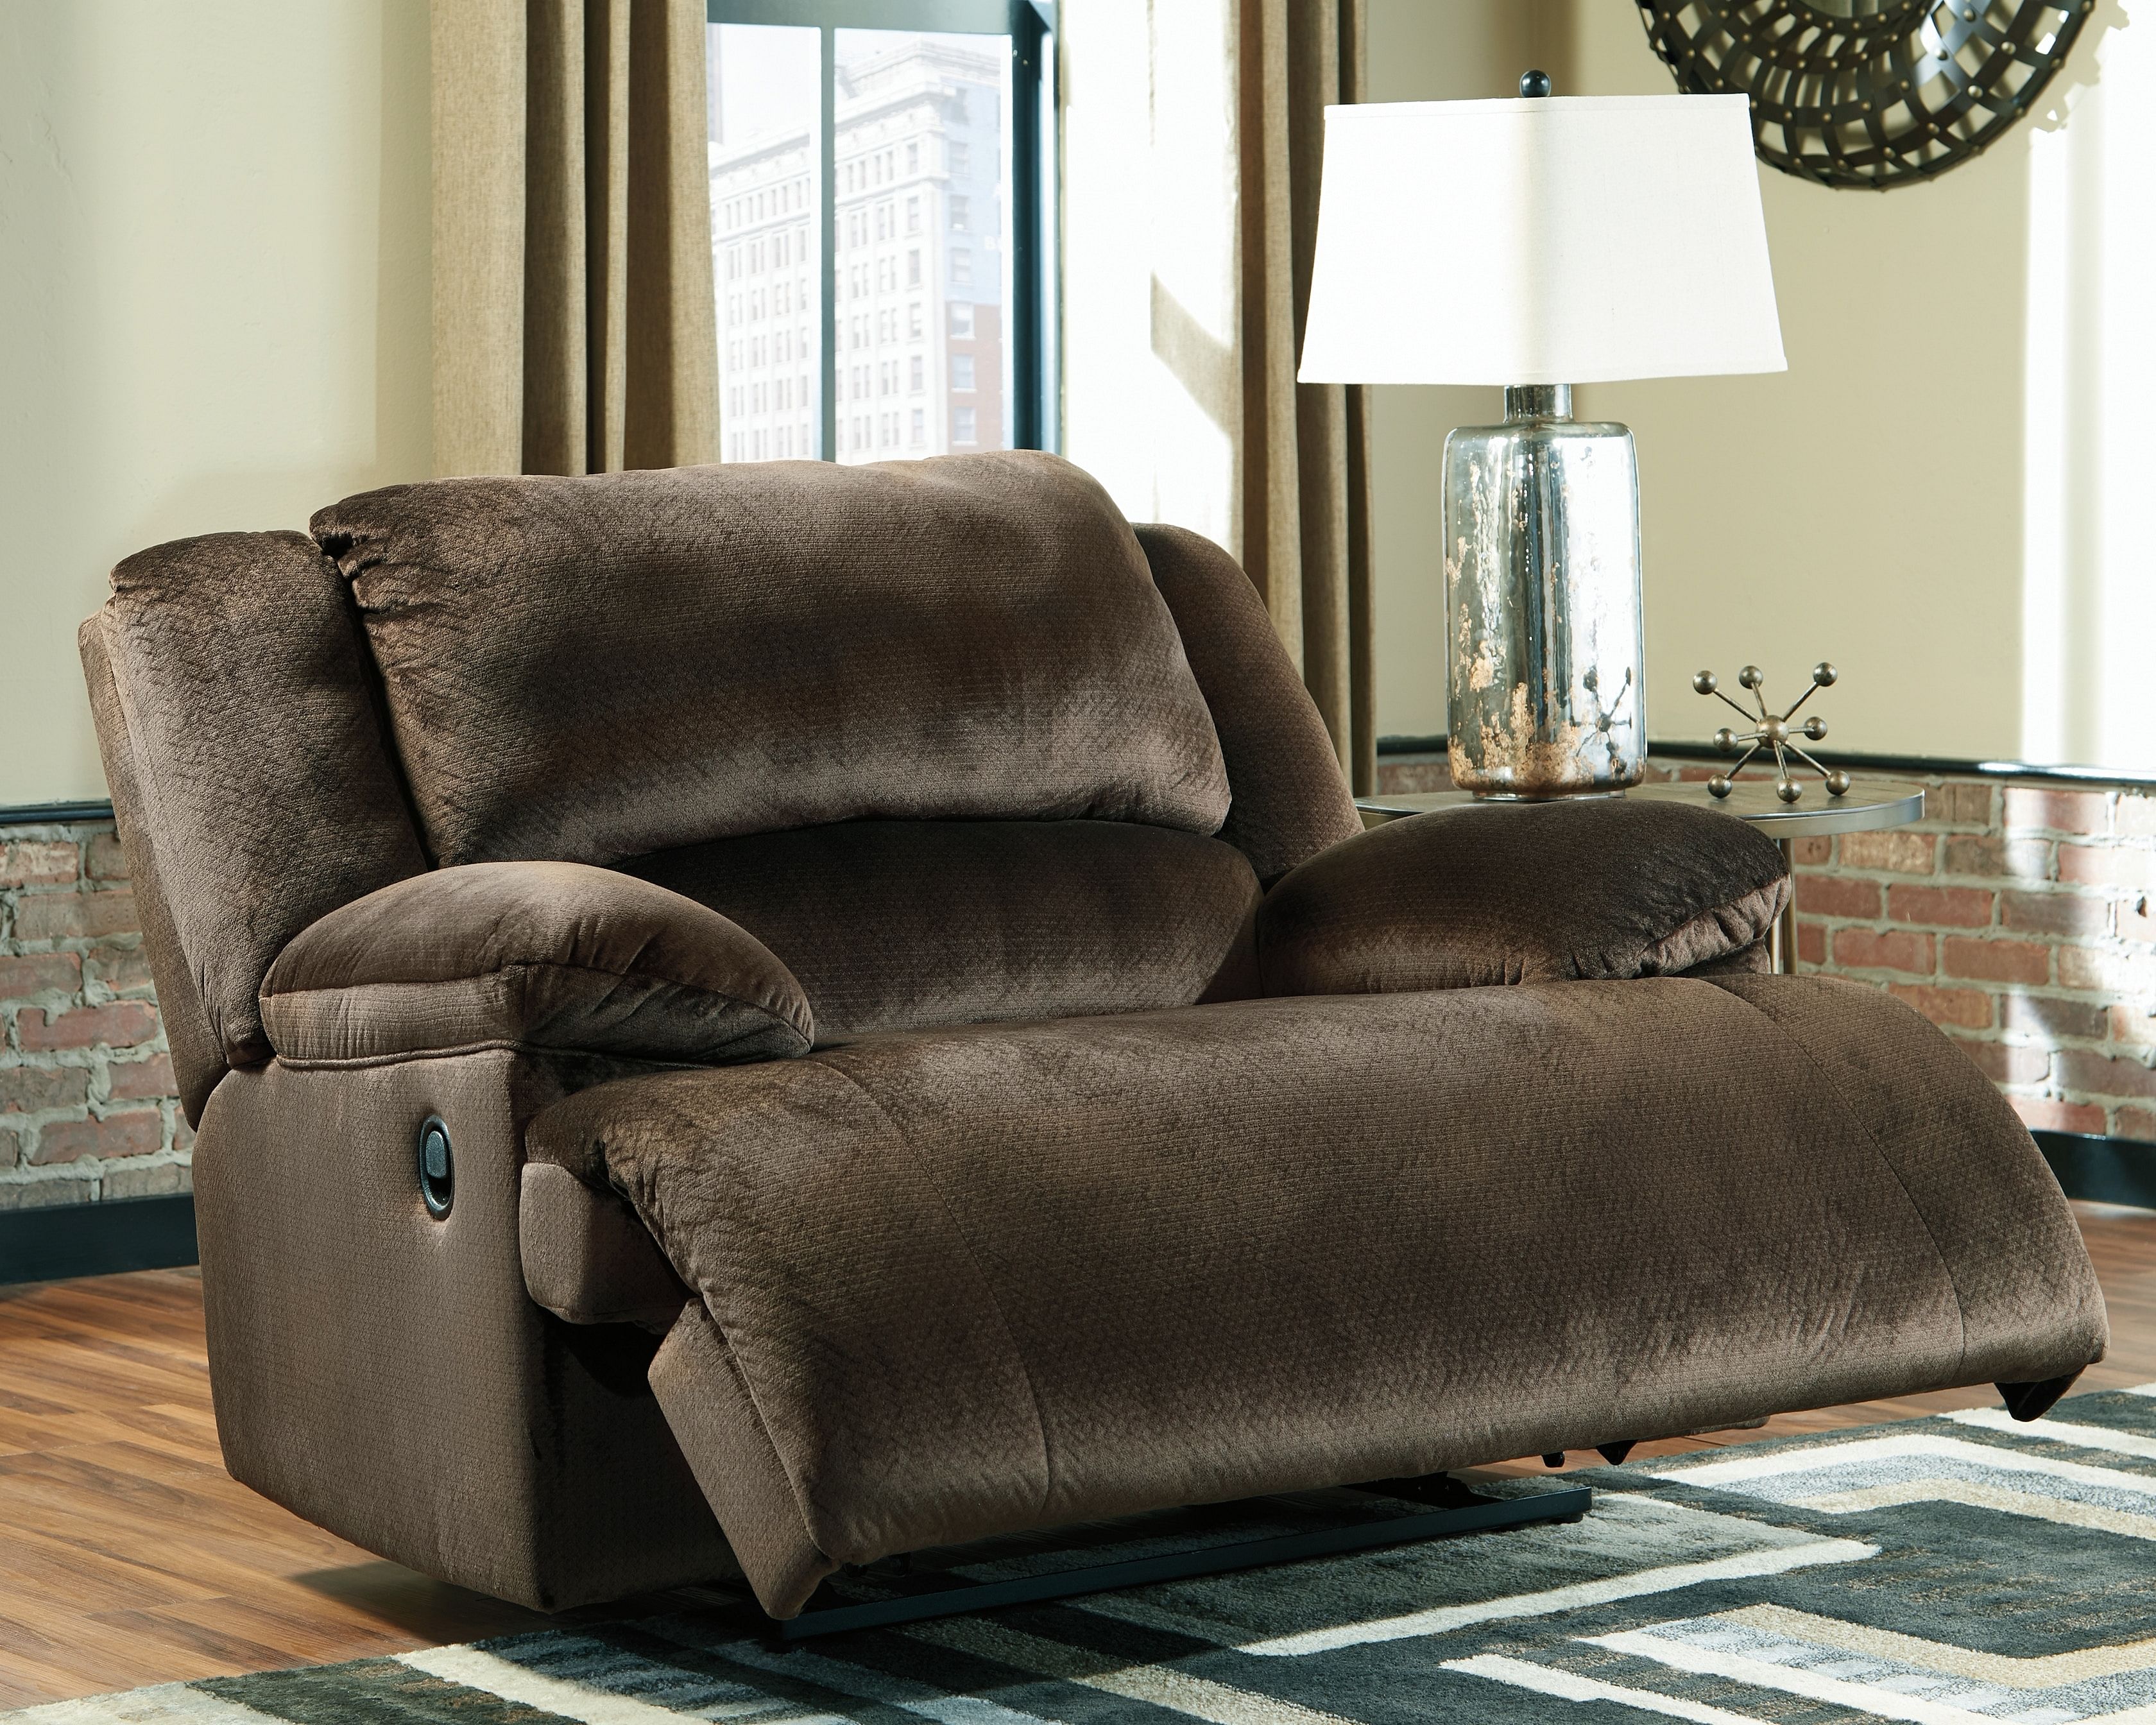 Living Room Recliners Ashley Living Room Clonmel Oversized Recliner 3650452  at iStyle Furniture Store